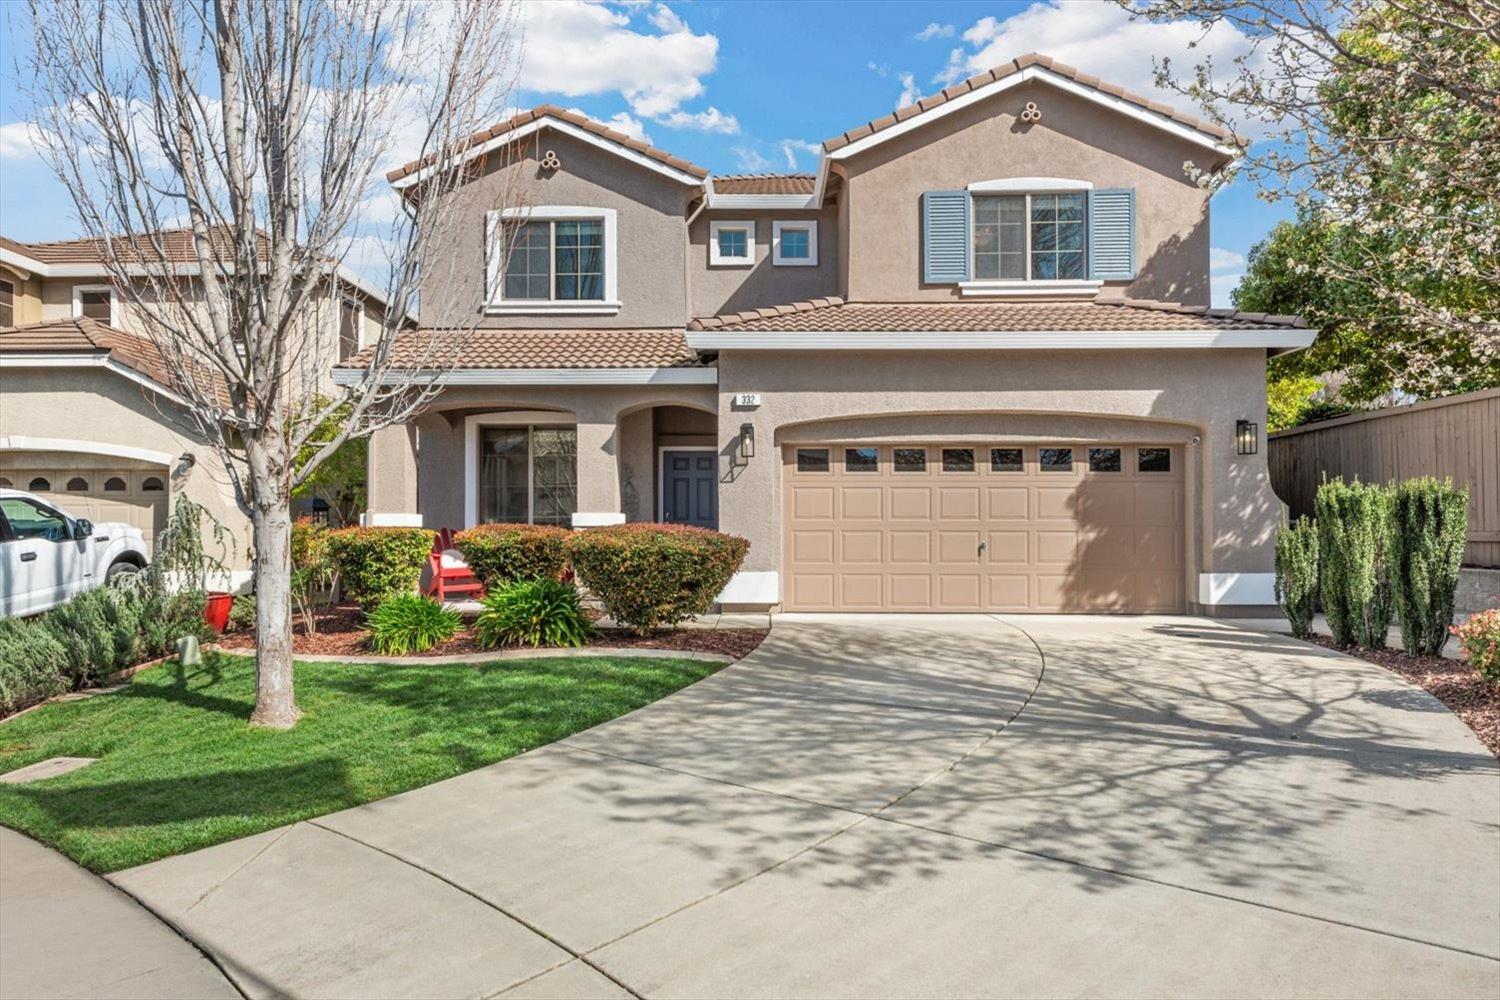 Photo of 332 Alsace Ct in Roseville, CA